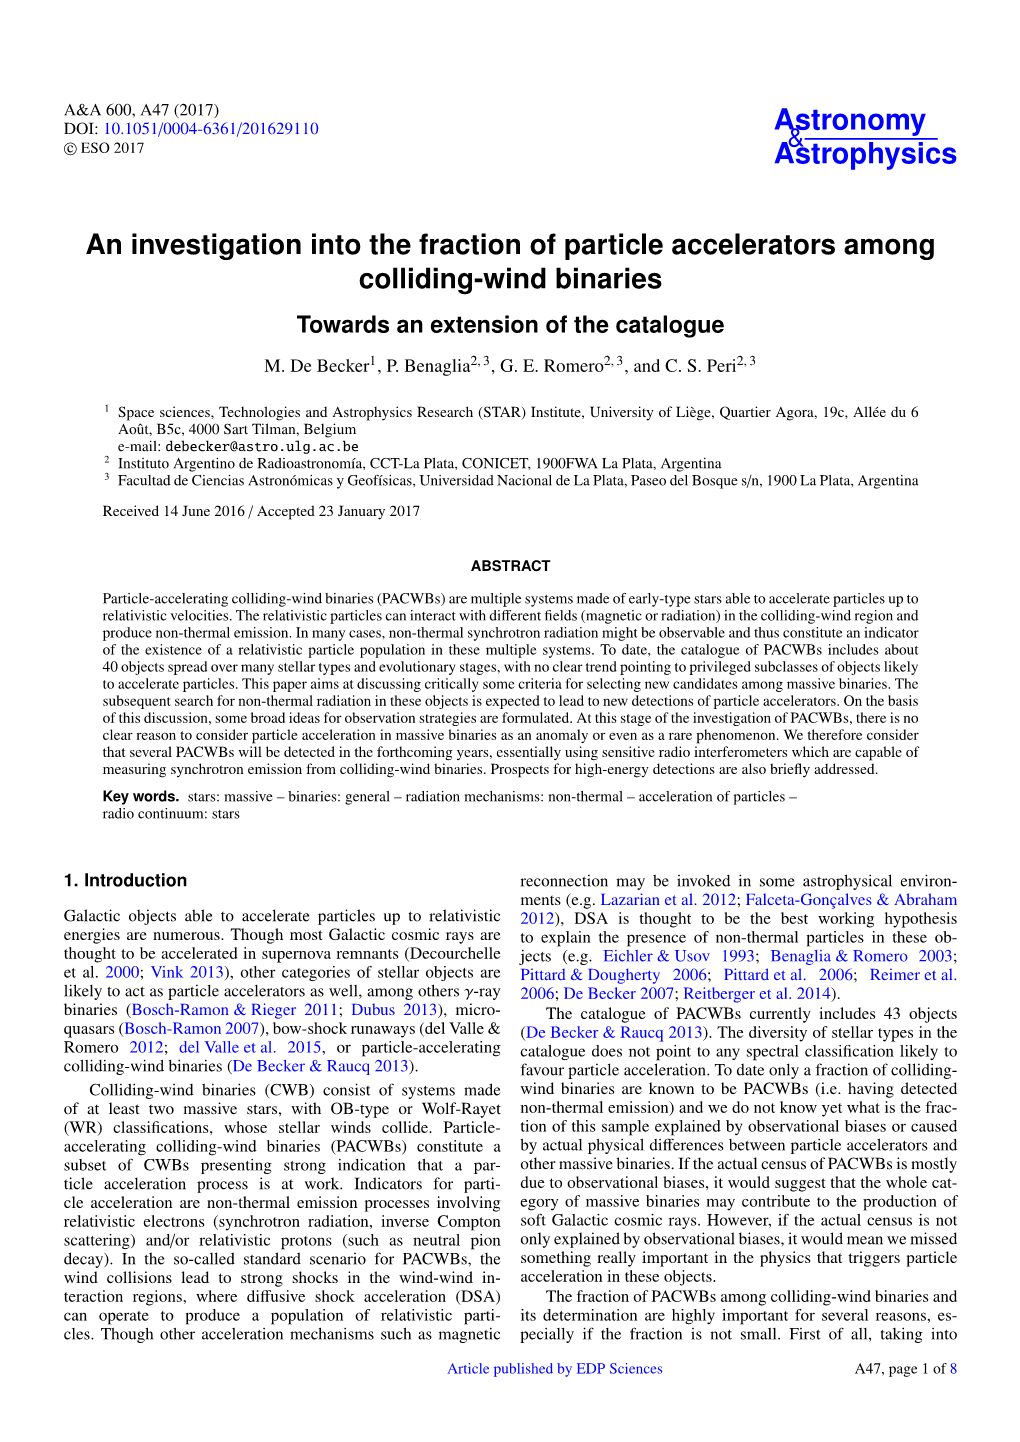 An Investigation Into the Fraction of Particle Accelerators Among Colliding-Wind Binaries Towards an Extension of the Catalogue